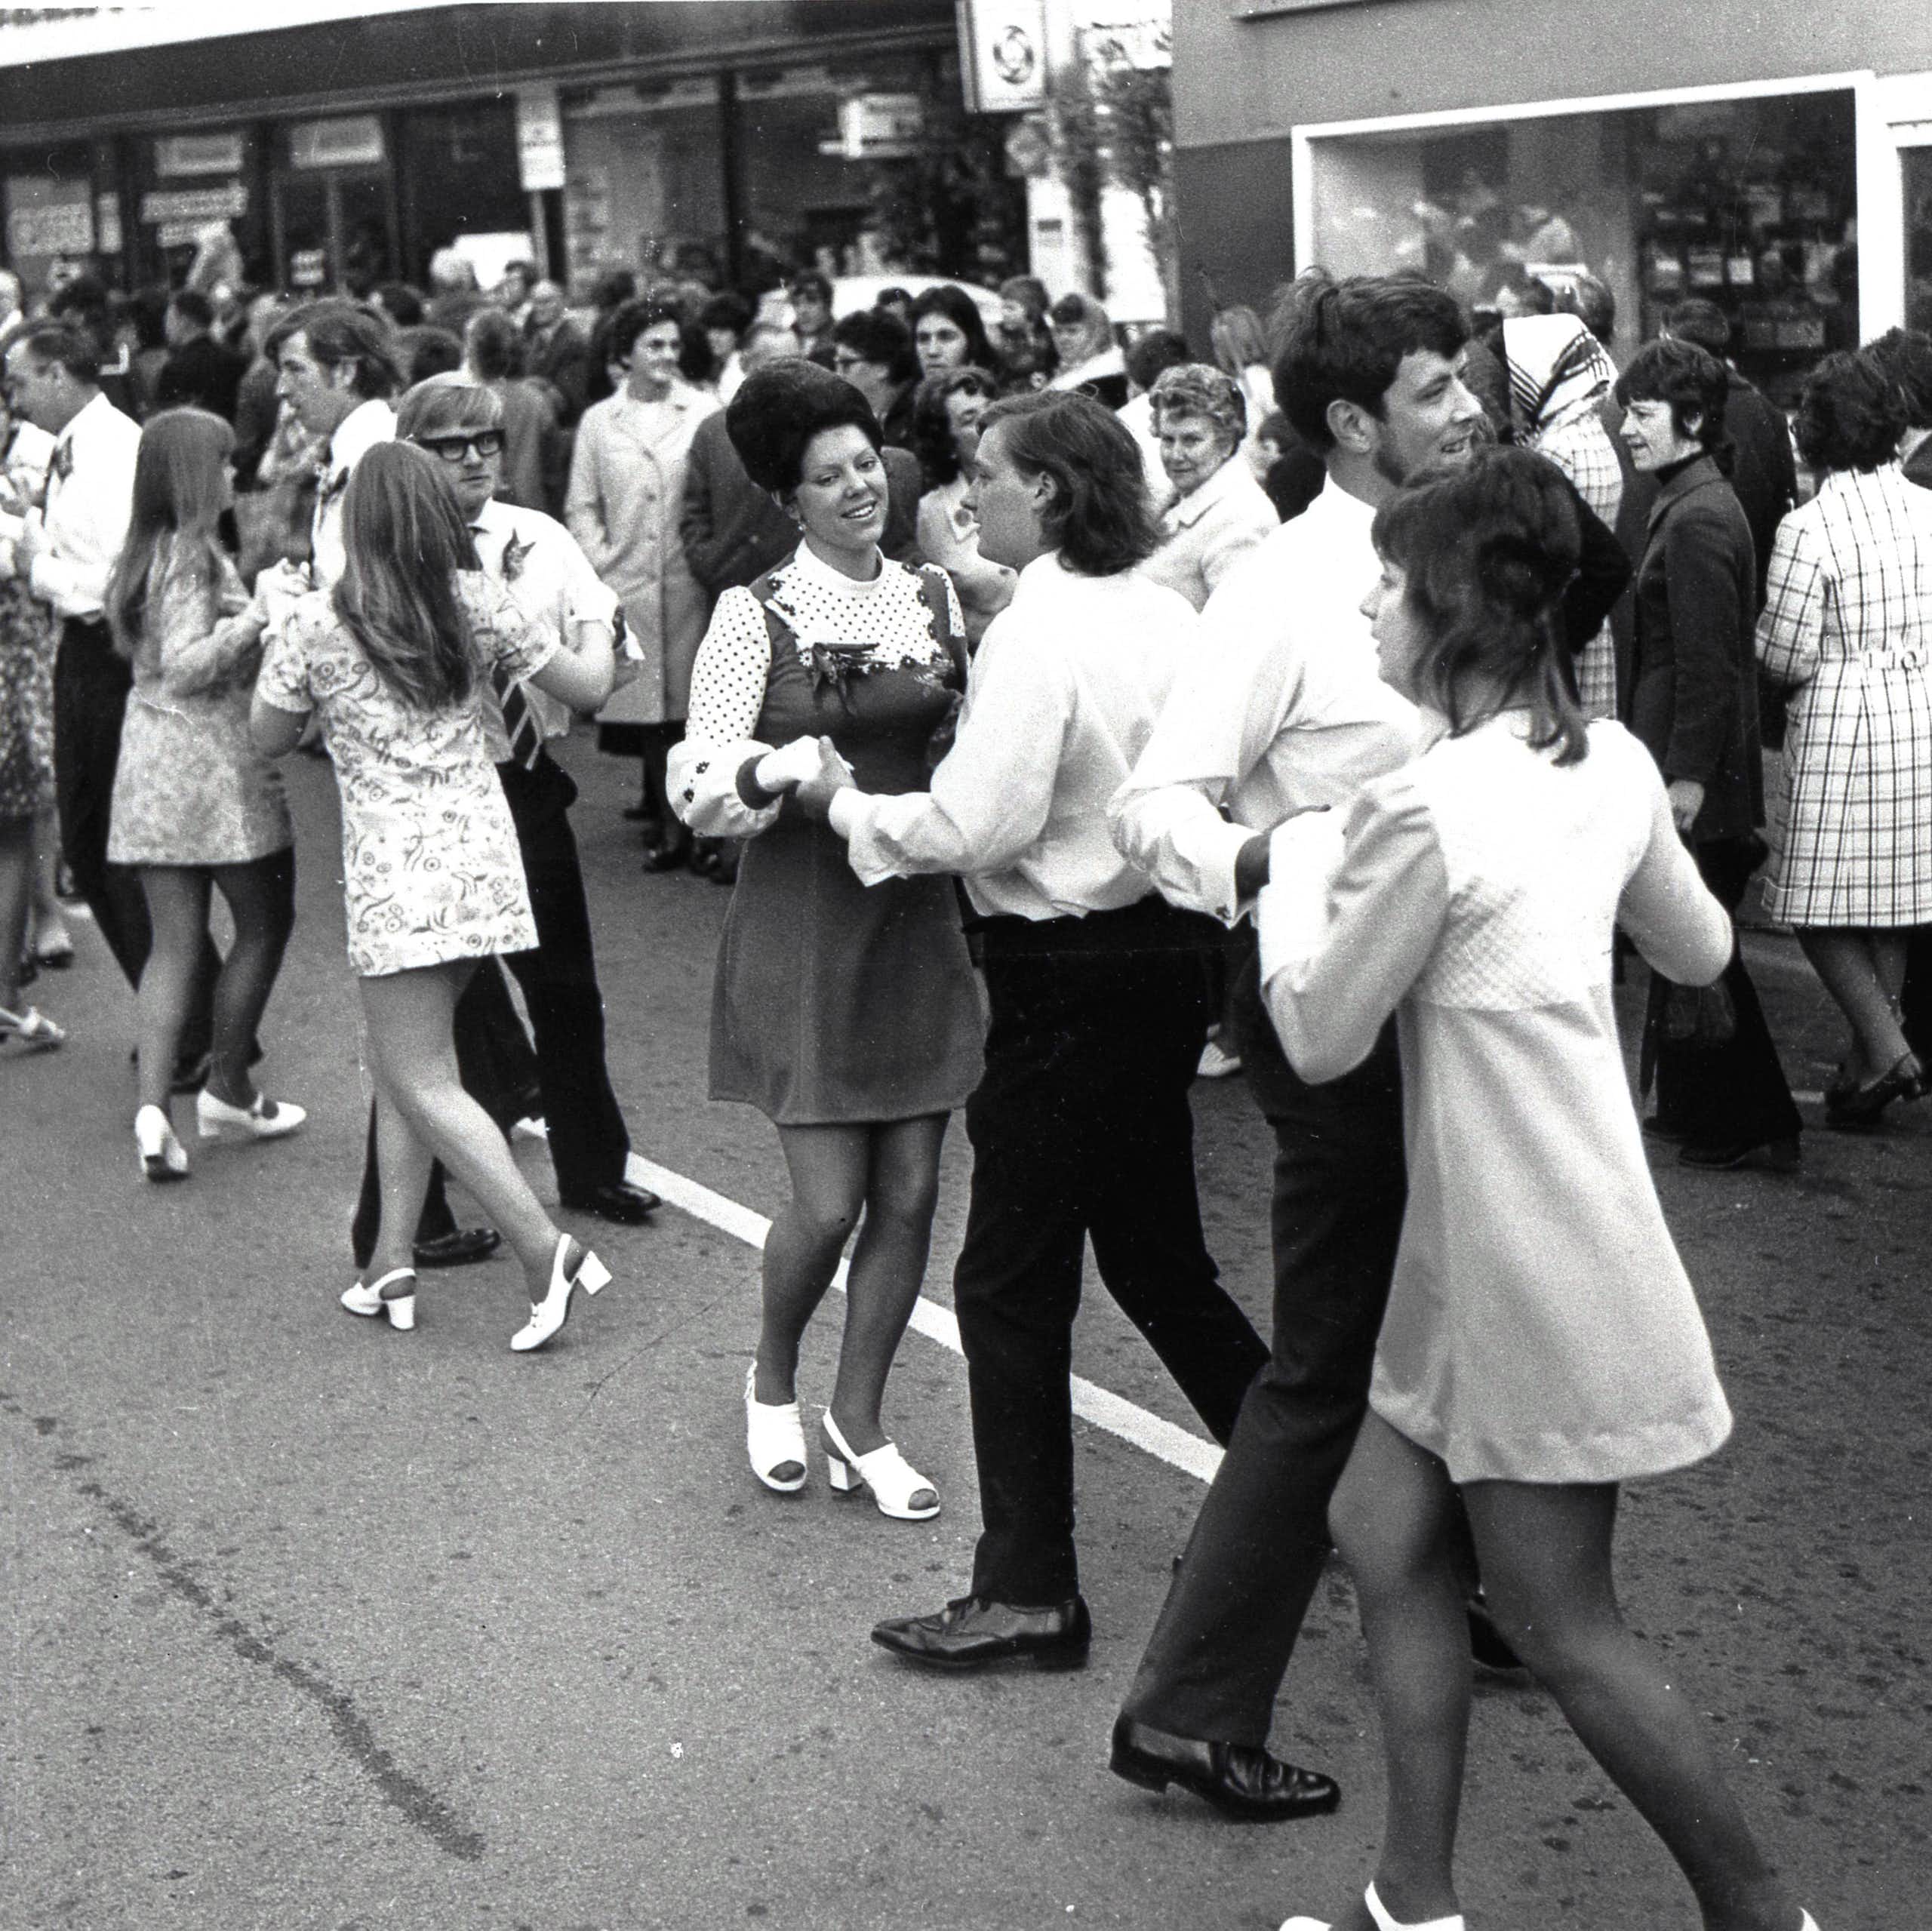 An archival black and white photograph of young people dancing in the street.